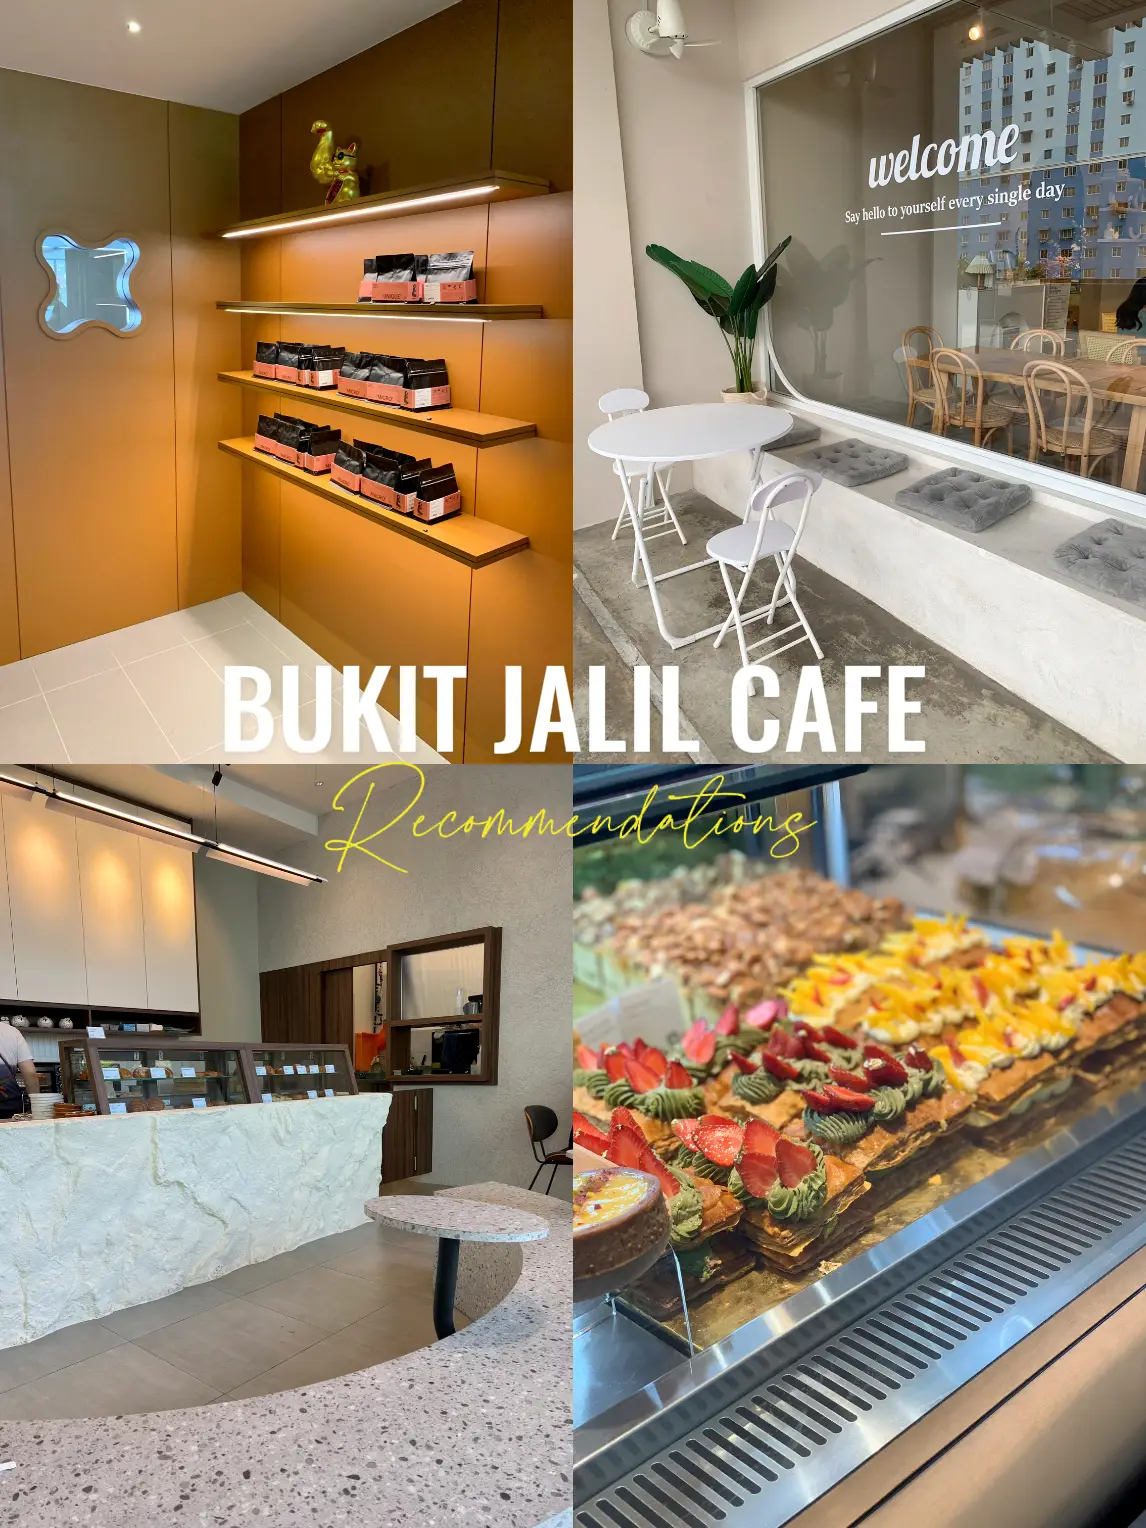 Top 5 Cafes You Need to Visit at Bukit Jalil!